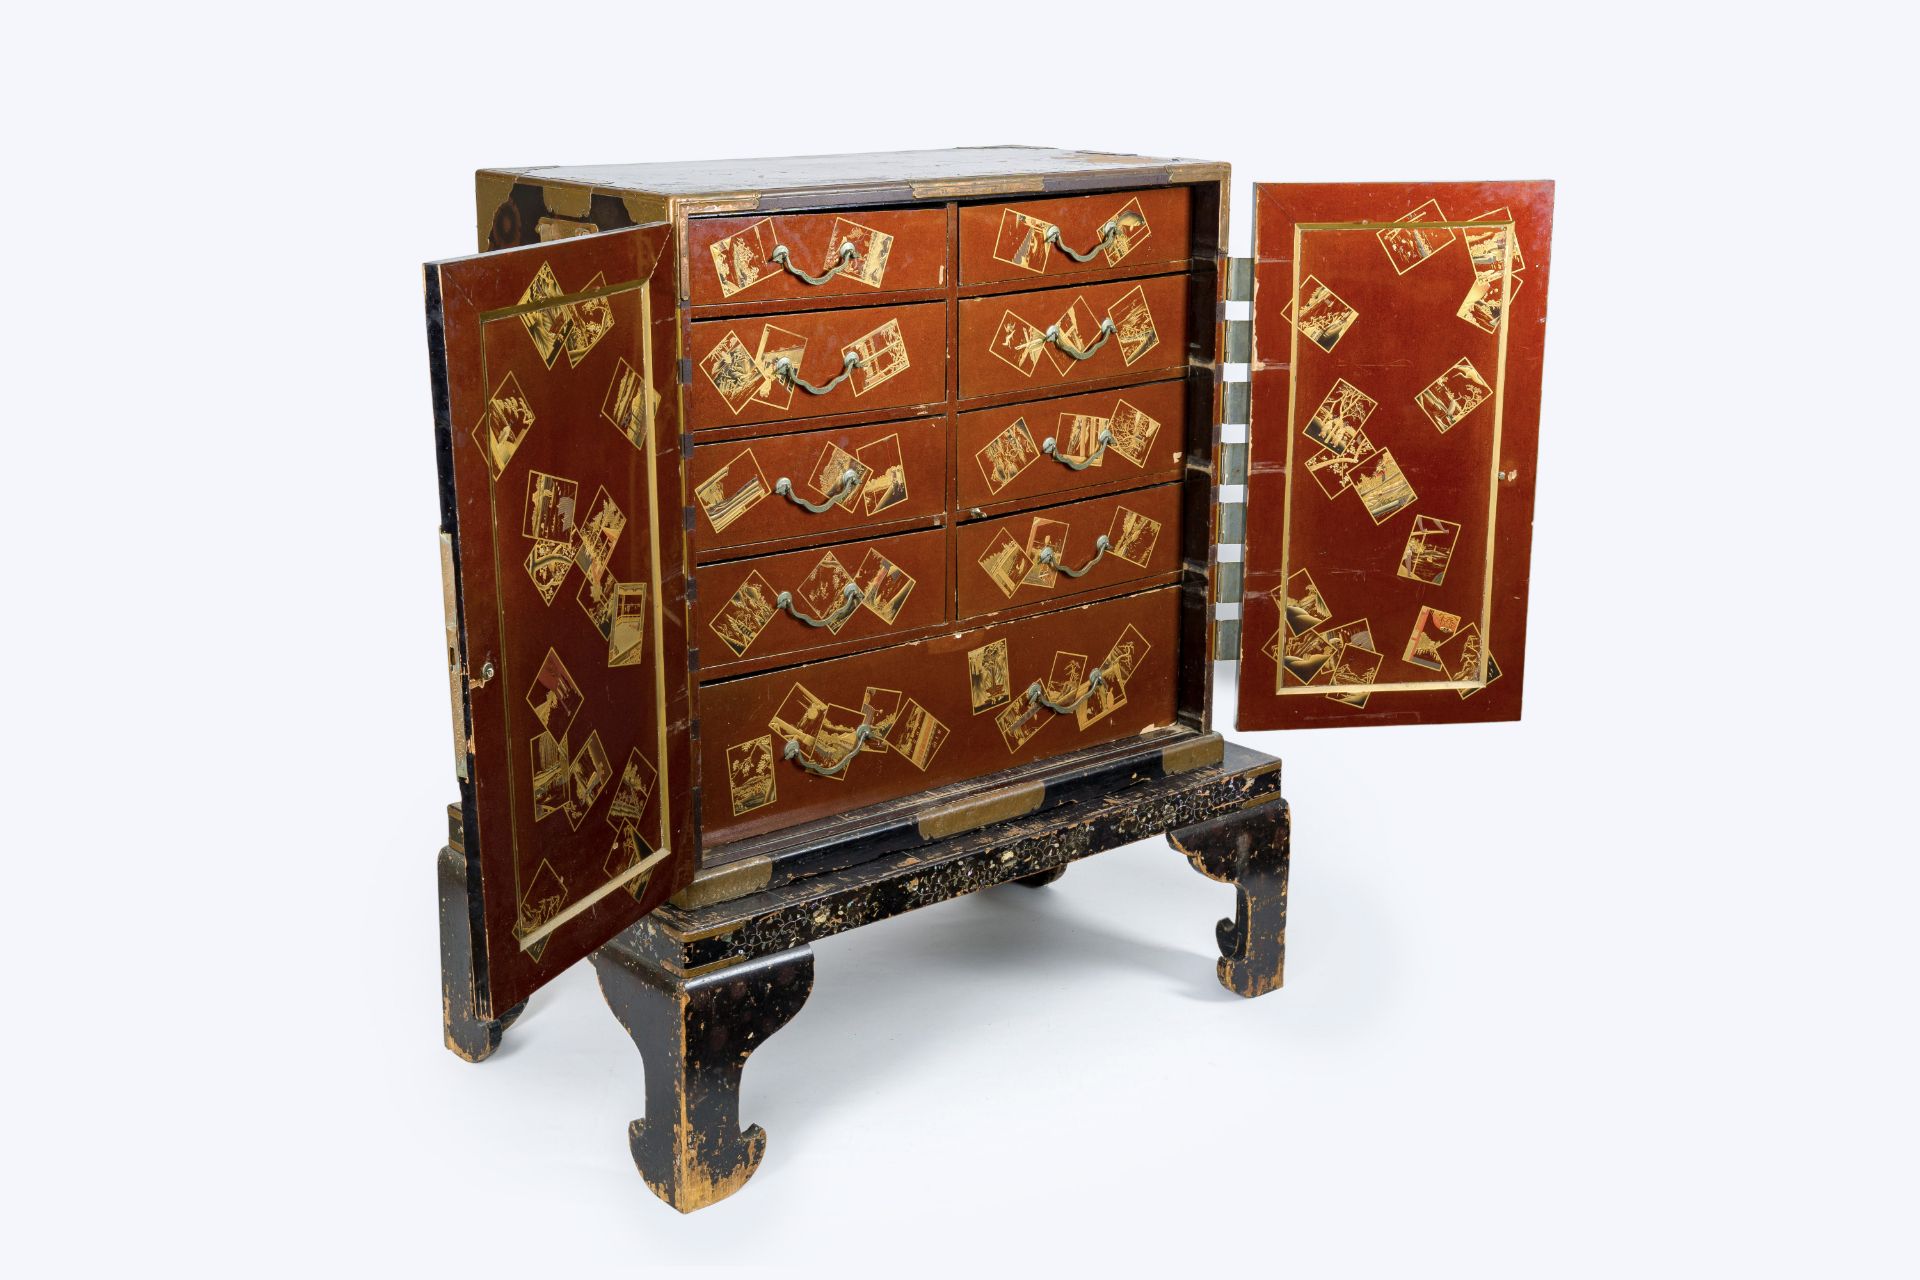 A Japanese lacquer cabinet on mother-of-pearl-inlaid stand, Meiji, 19th C.